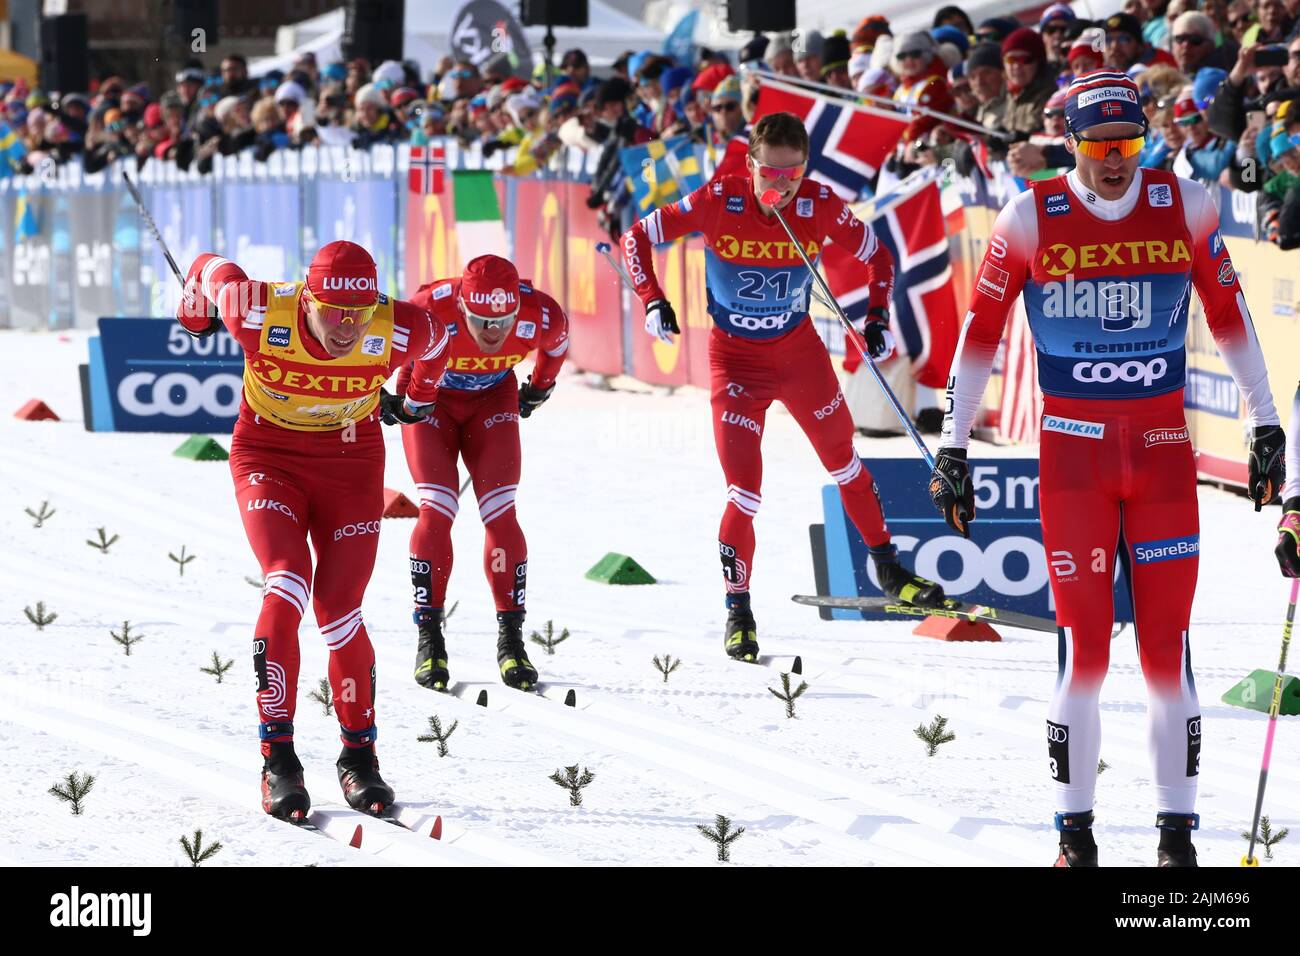 Val Di Fiemme, Italy. 4th Jan 2020.  Alexander Bolshunov (RUS), Denis Spitsov, RUS, Paal Golberg, NOR in action during the Sprint Classic Race event of the FIS Tour de Ski - FIS Cross Country Ski World Cup 2019-20 on January 4, 2020 in Val Di Fiemme, Italy. Photo: Pierre Teyssot/Espa-Images Stock Photo